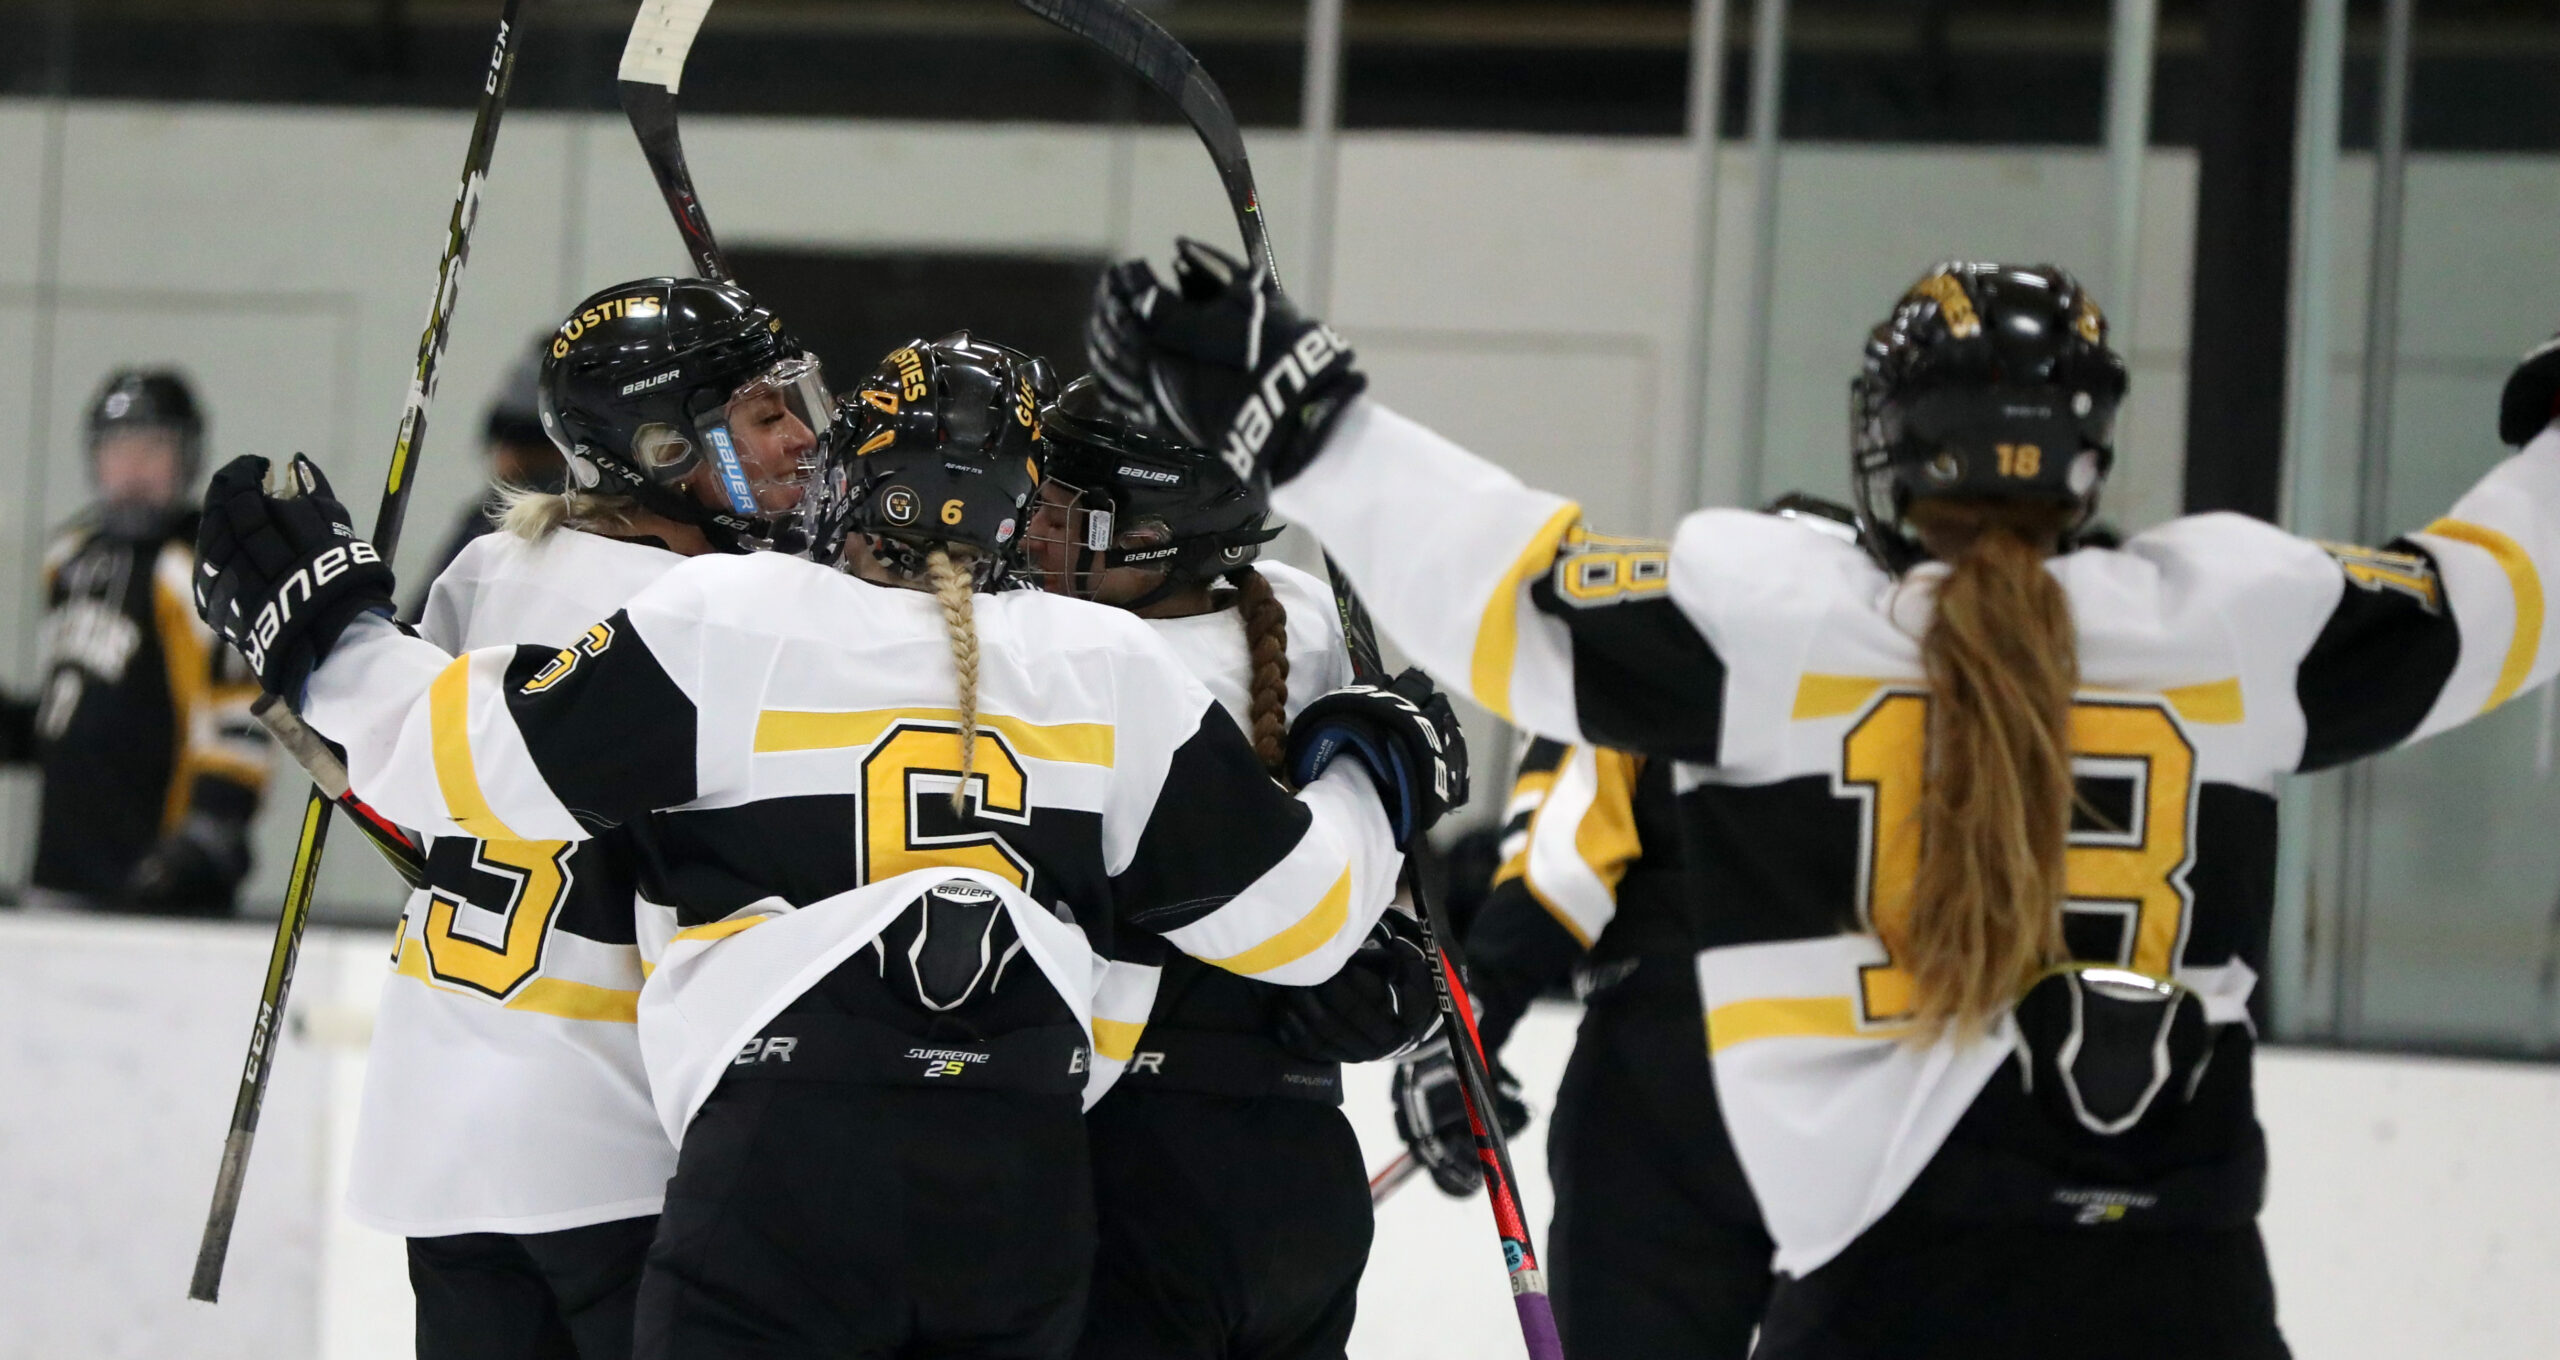 Women’s Hockey Sweeps Concordia Posted on January 22nd, 2022 by CJ